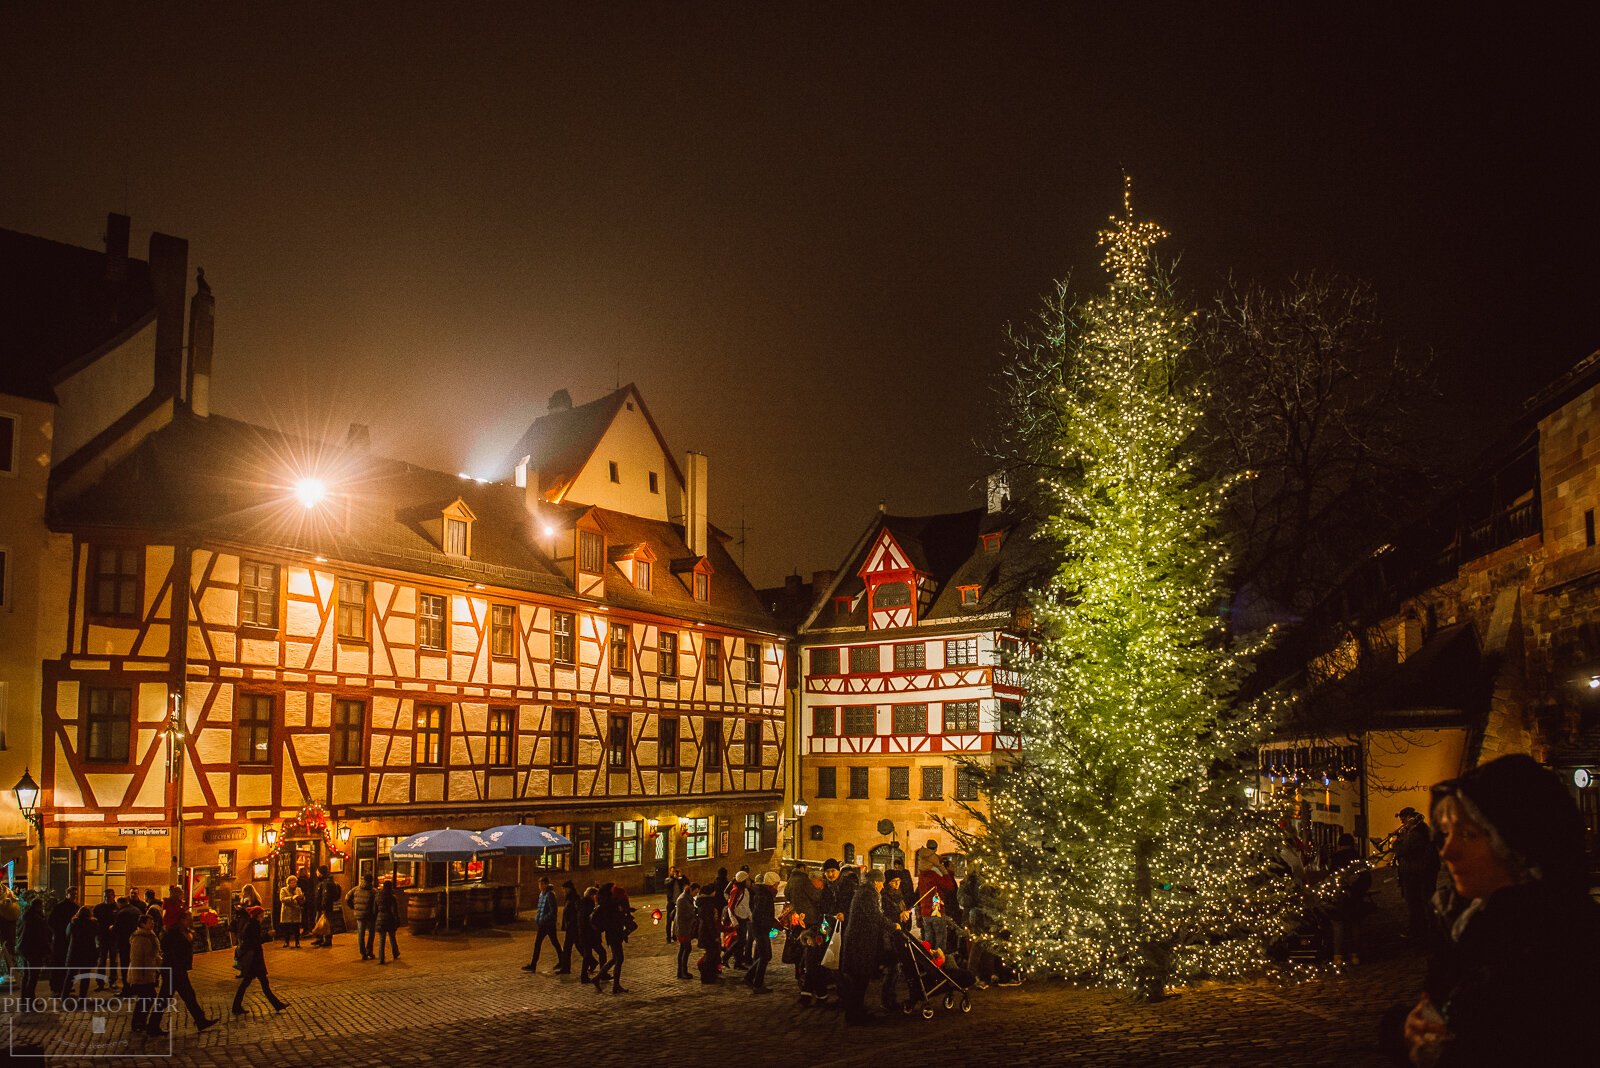   Read all about it on the blog:   Christmas in Germany - Nurnberg Christkindlesmarkt    